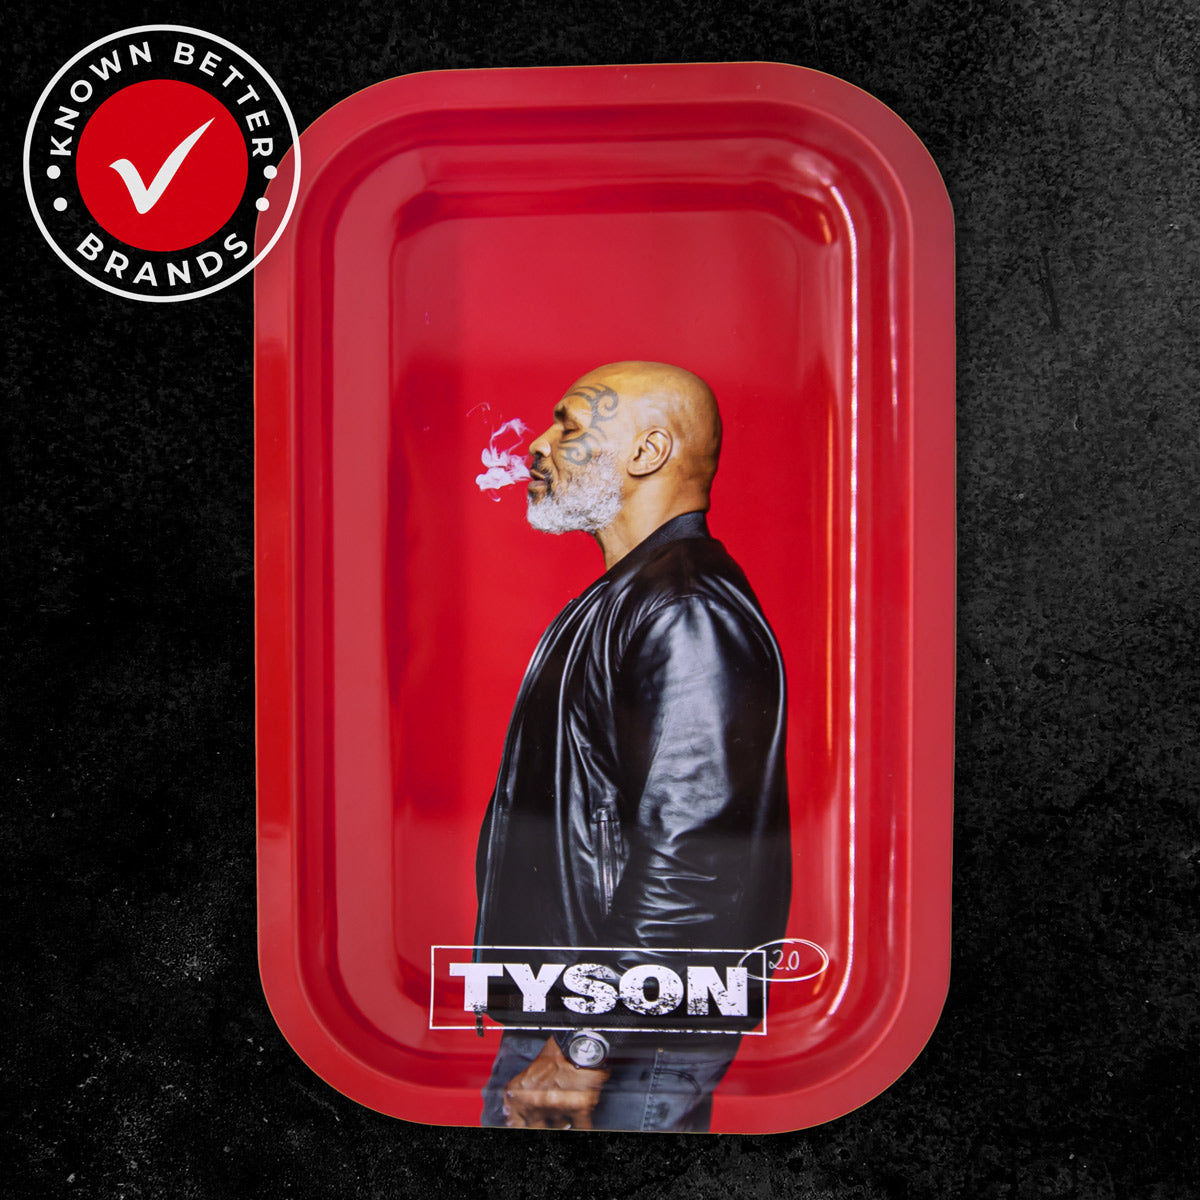 TYSON 2.0 Floating Red Rolling Tray - Premium Aluminum Design for Precision Rolling and Style. No More Herb Spills with Raised Edges, Smooth Surface for Effortless Handling. Affordable and Durable - Knocking Out the Competition. Experience the Power of TYSON 2.0 - Elevate Your Rolling Game!